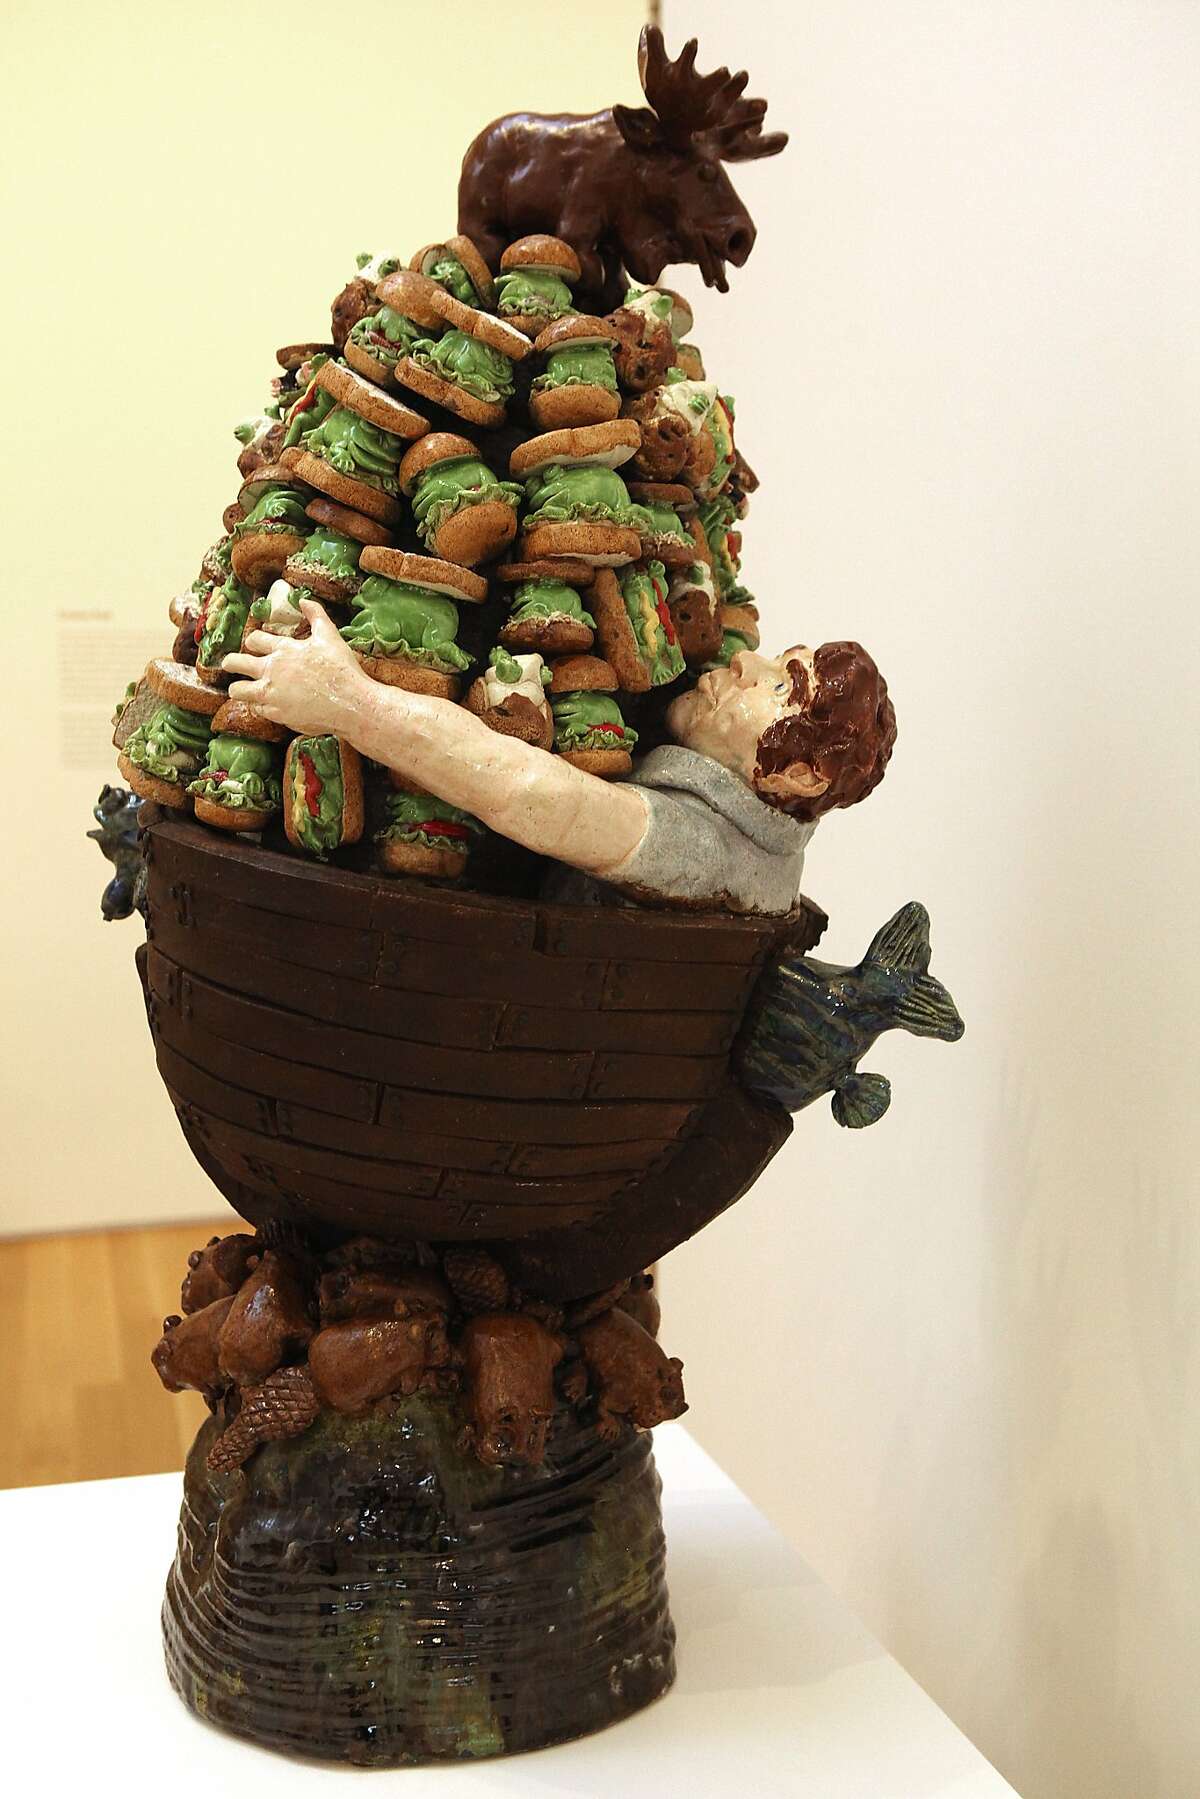 Hoarding My Frog Food 1982, glazed ceramic by artist David Gilhooly displayed at the new Anderson Collection building at Stanford University in Palo Alto, Calif., on Monday, September 15, 2014.